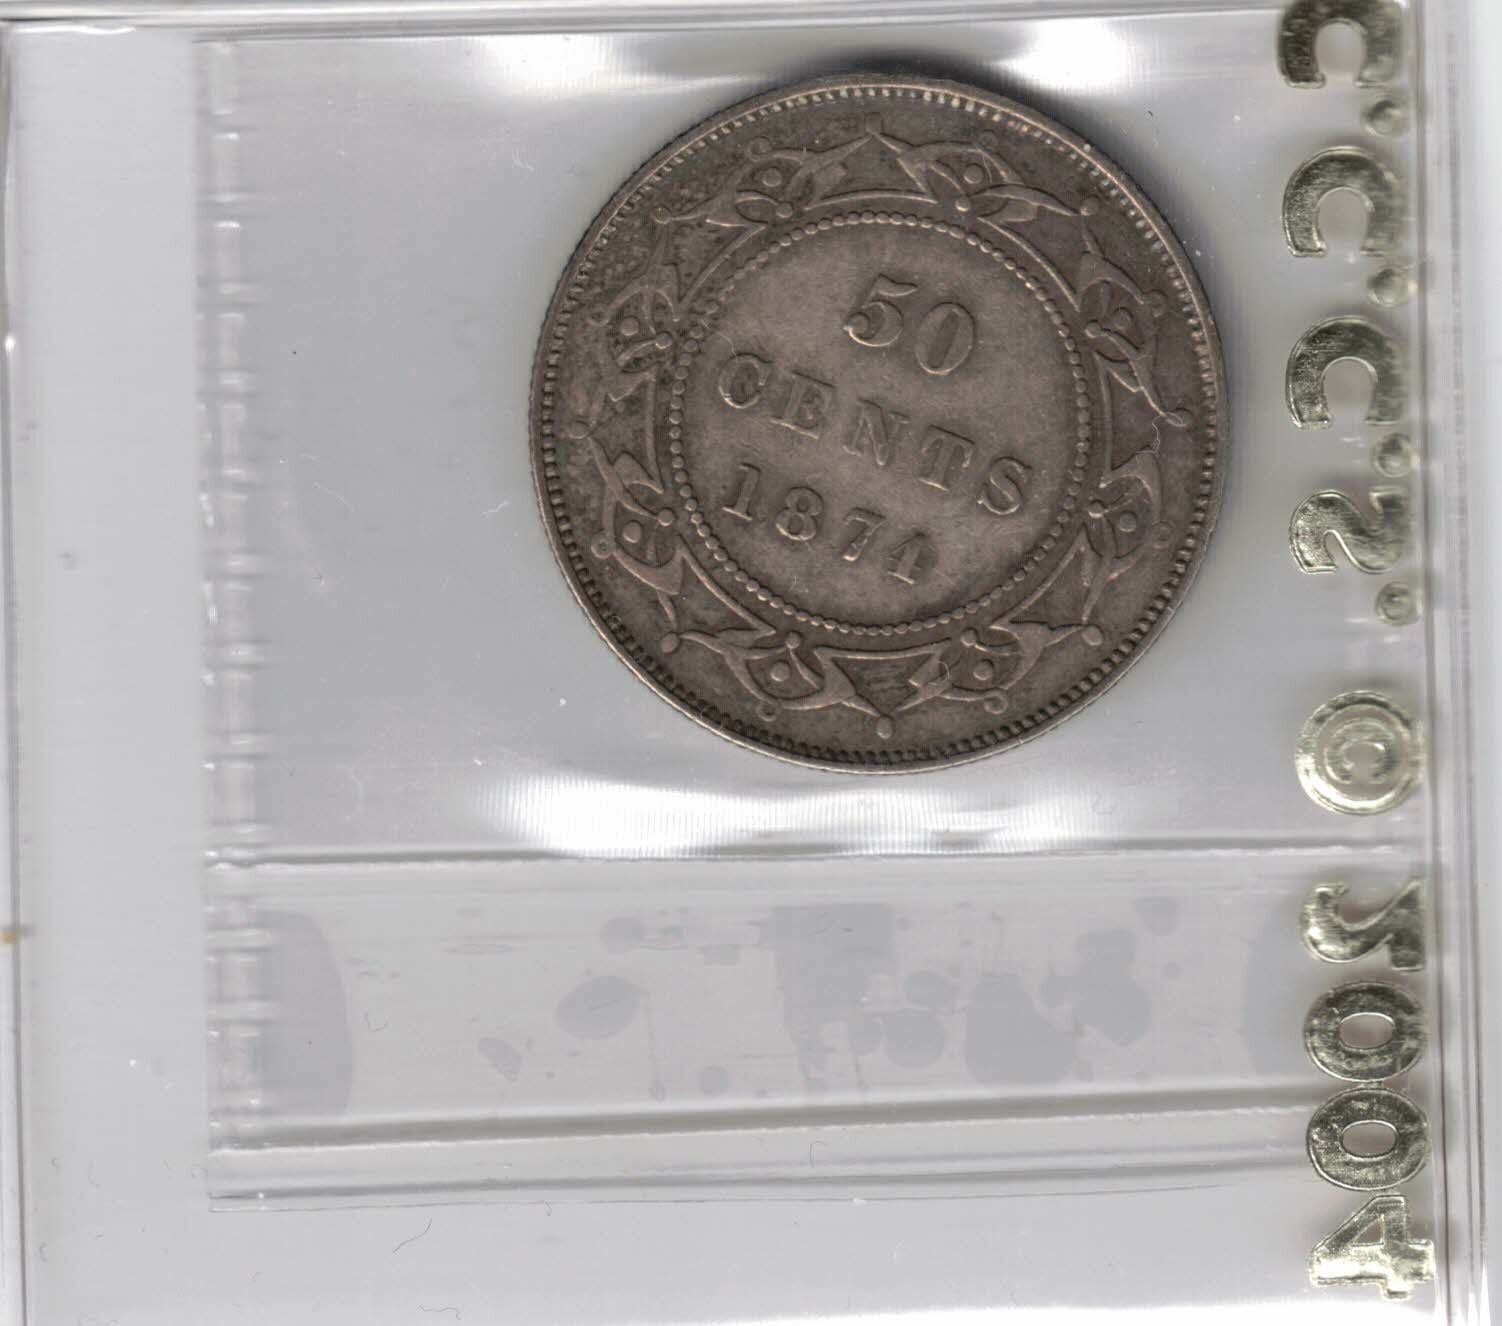 Newfoundland 1874 50 Cents Queen Victoria Sterling Silver Coin Graded Cccs Vf-35